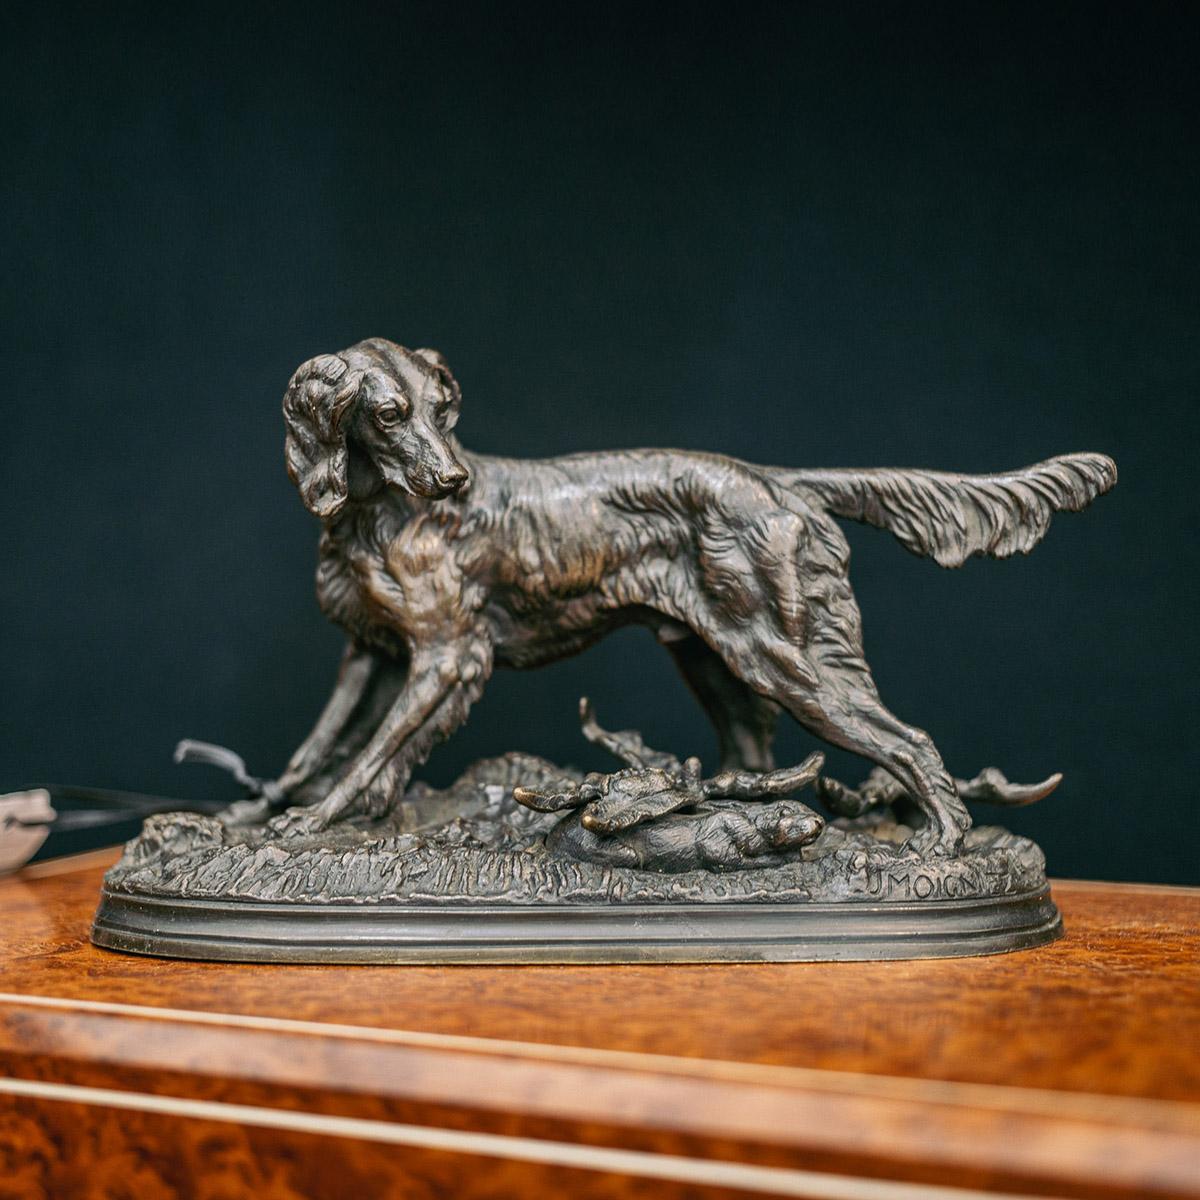 Antique 19th century French bronze by JULES MOIGNIEZ (1835-1894): SETTER WITH HARE, the setter looking back at the hare, crouched under foliage, inscribed to edge of oval base 'J MOIGNIEZ'.

CONDITION
in great condition - no